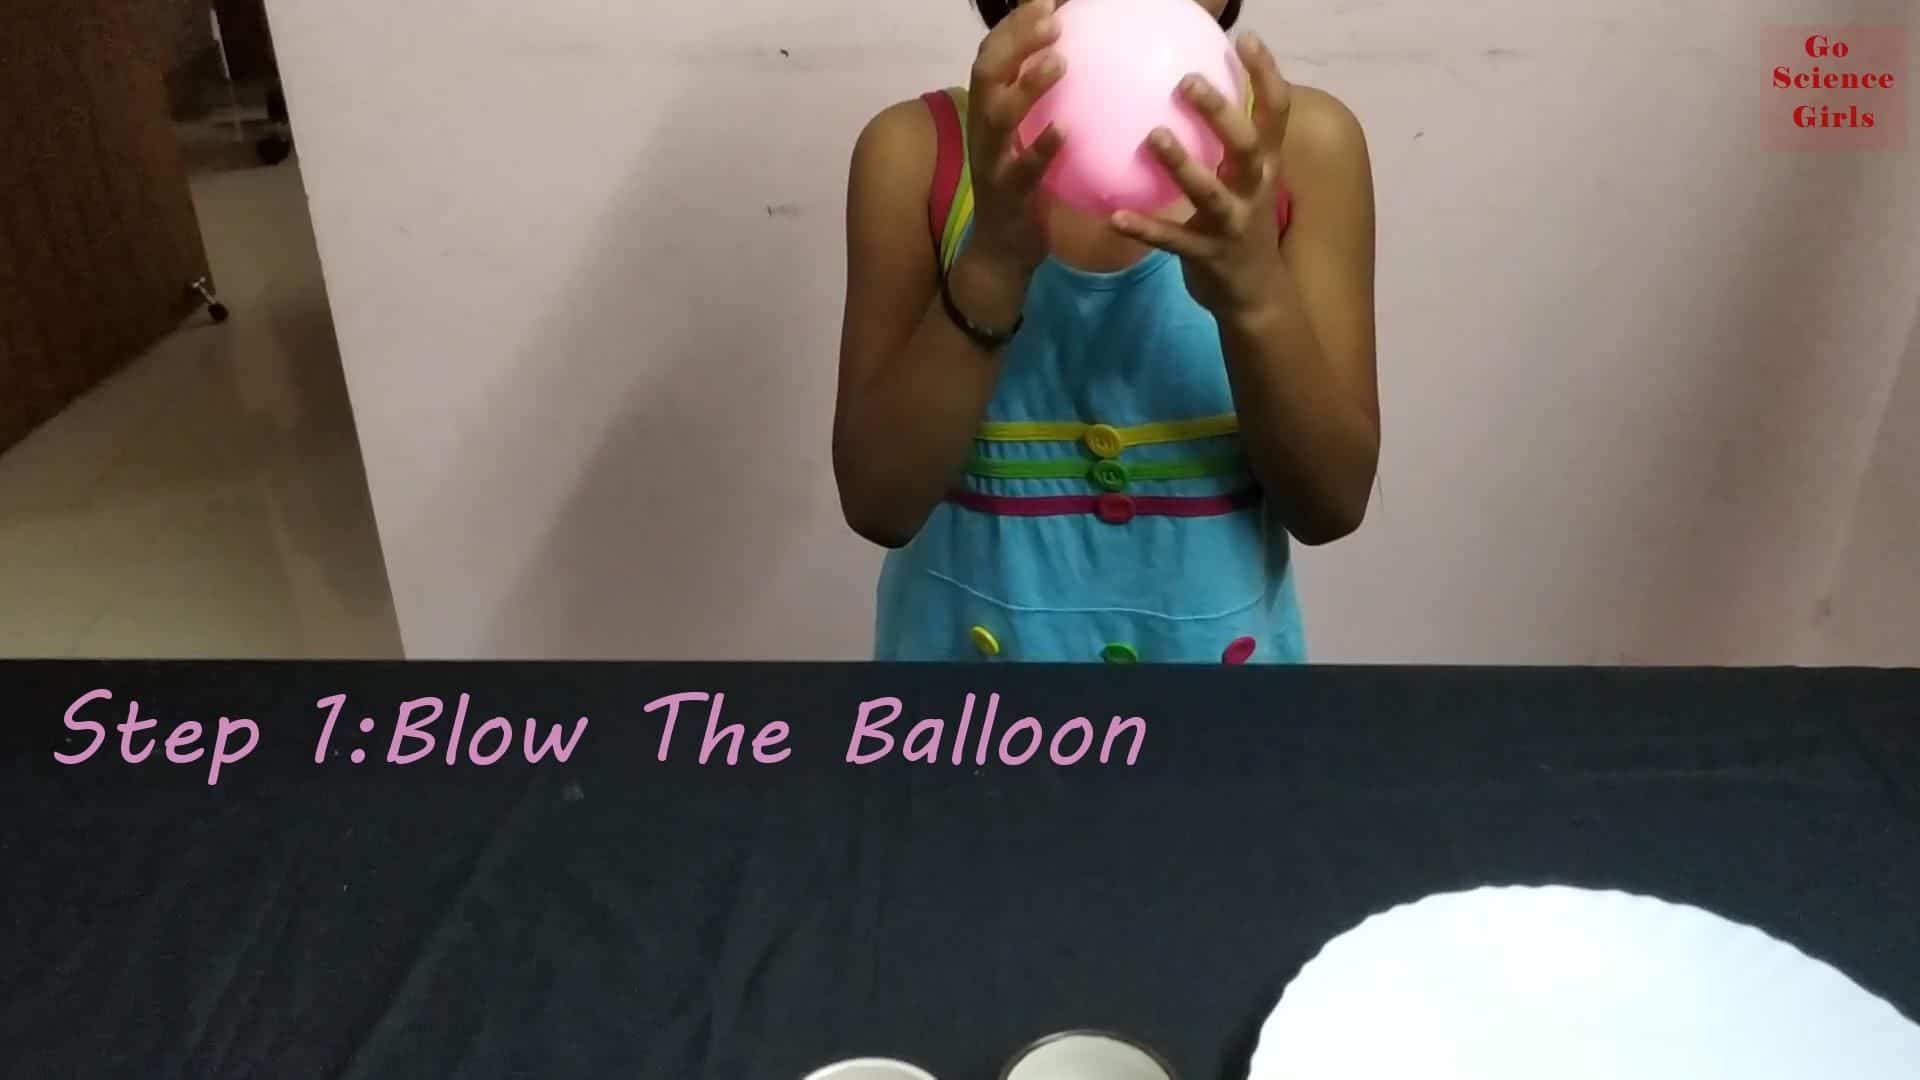 Blow the balloon static science experiment